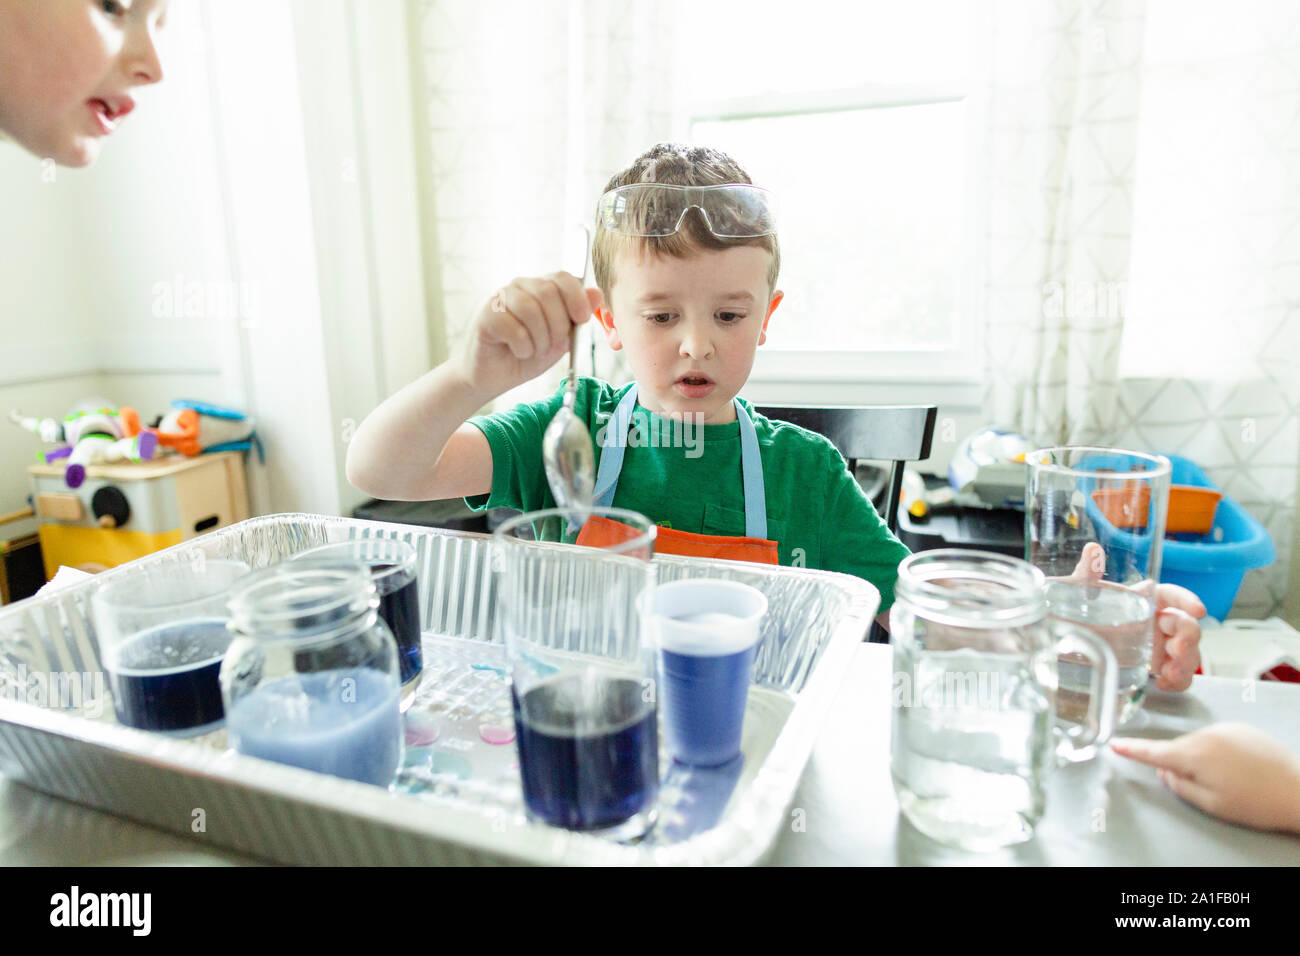 Elementary age boy focused doing chemistry science experiment at home Stock Photo